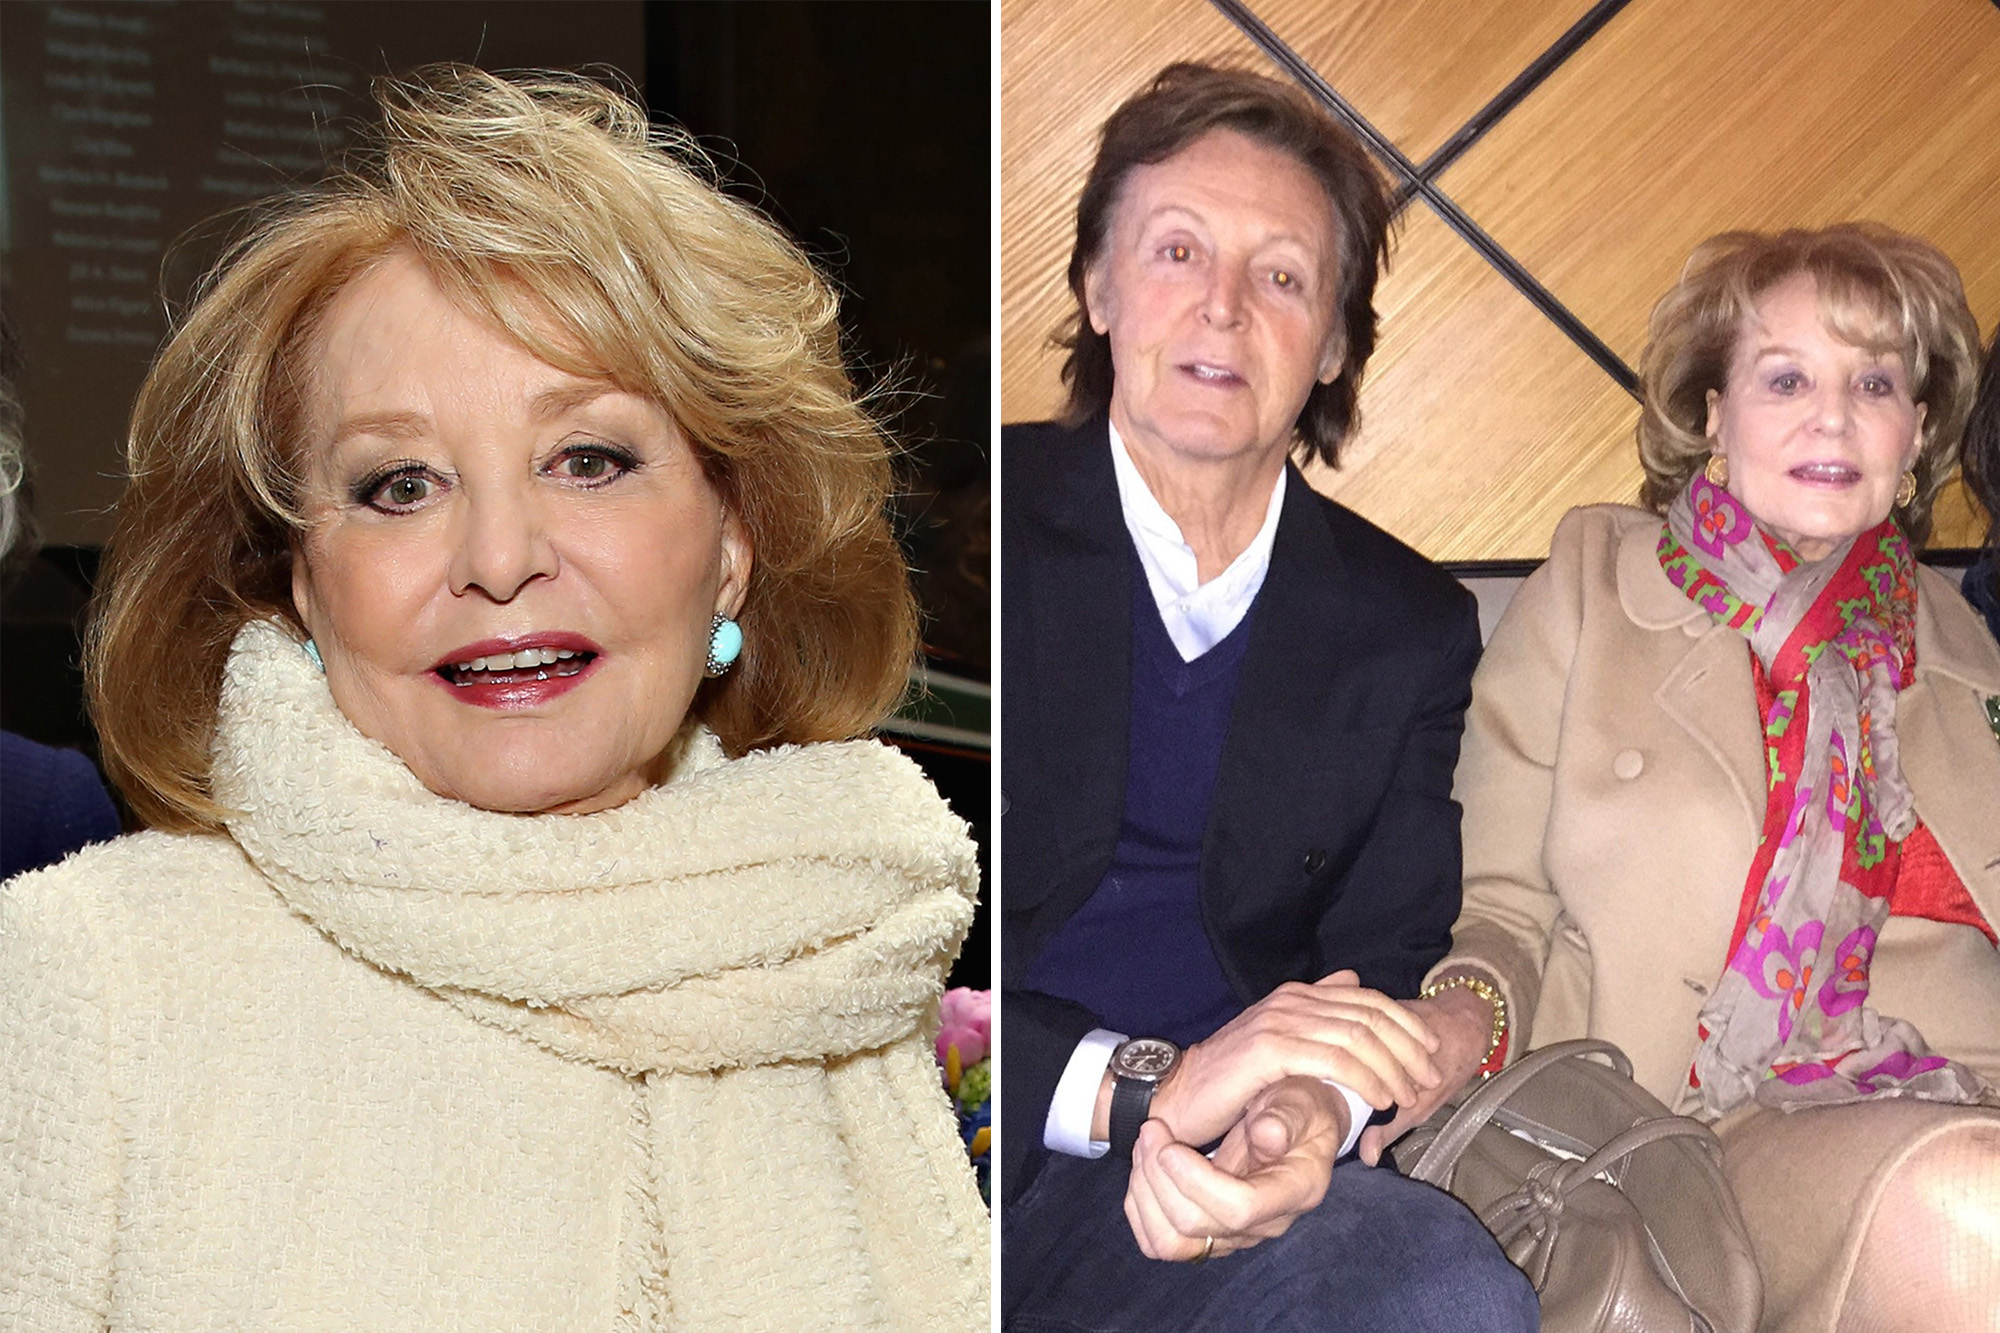 Paul mccartney mourns amazing barbara walters â they shared surprising connection